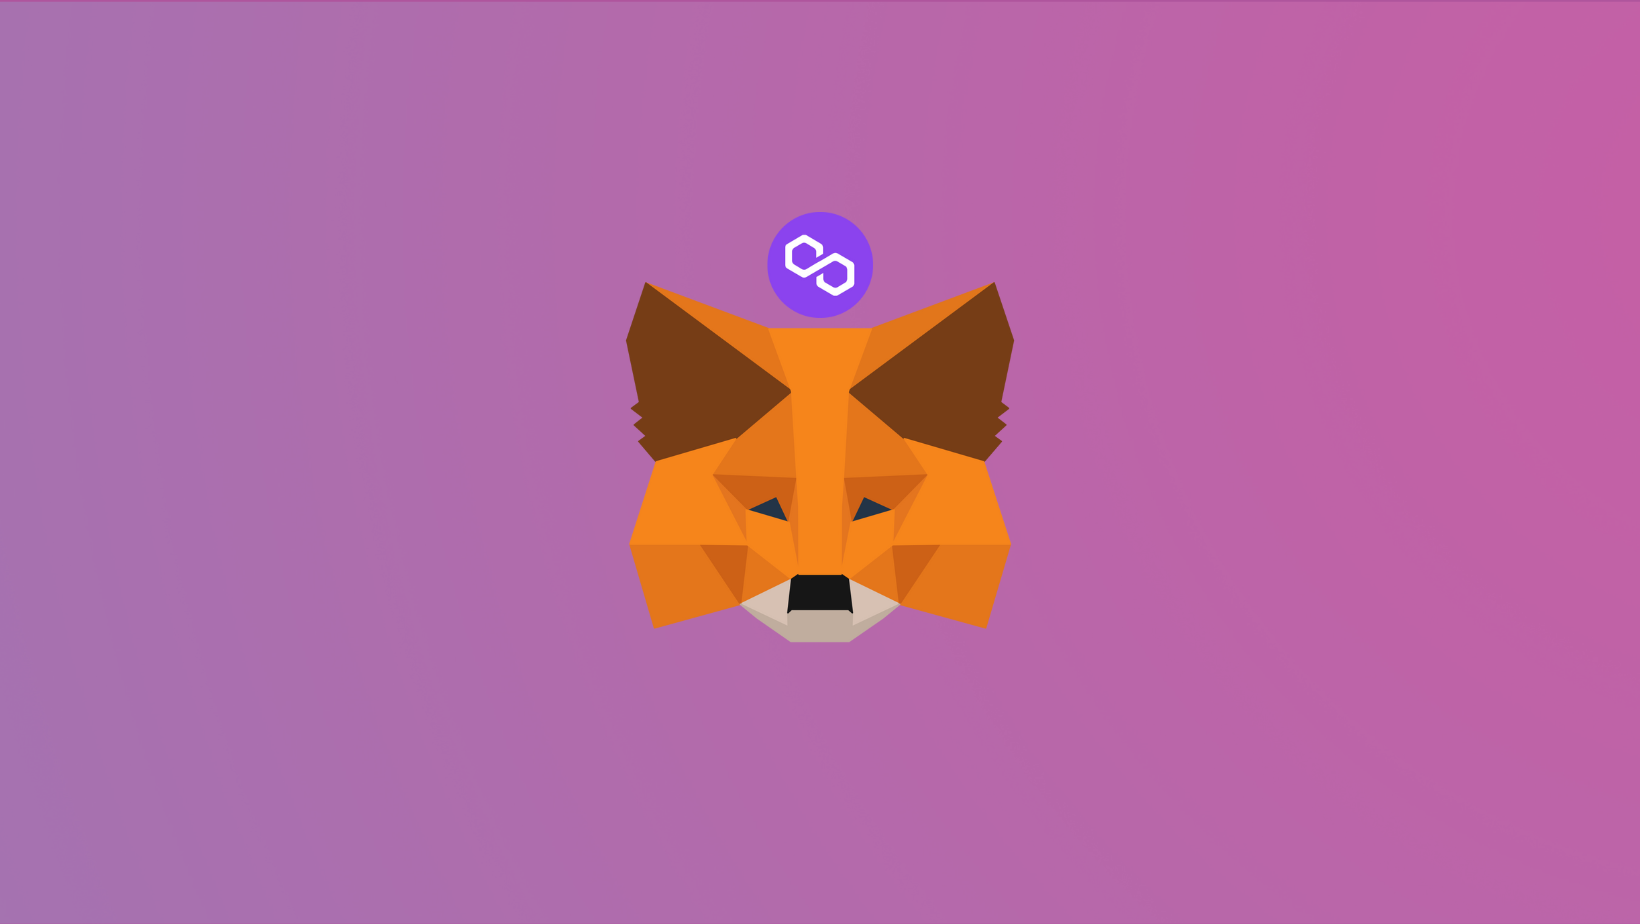 How to add MATIC to MetaMask Wallet